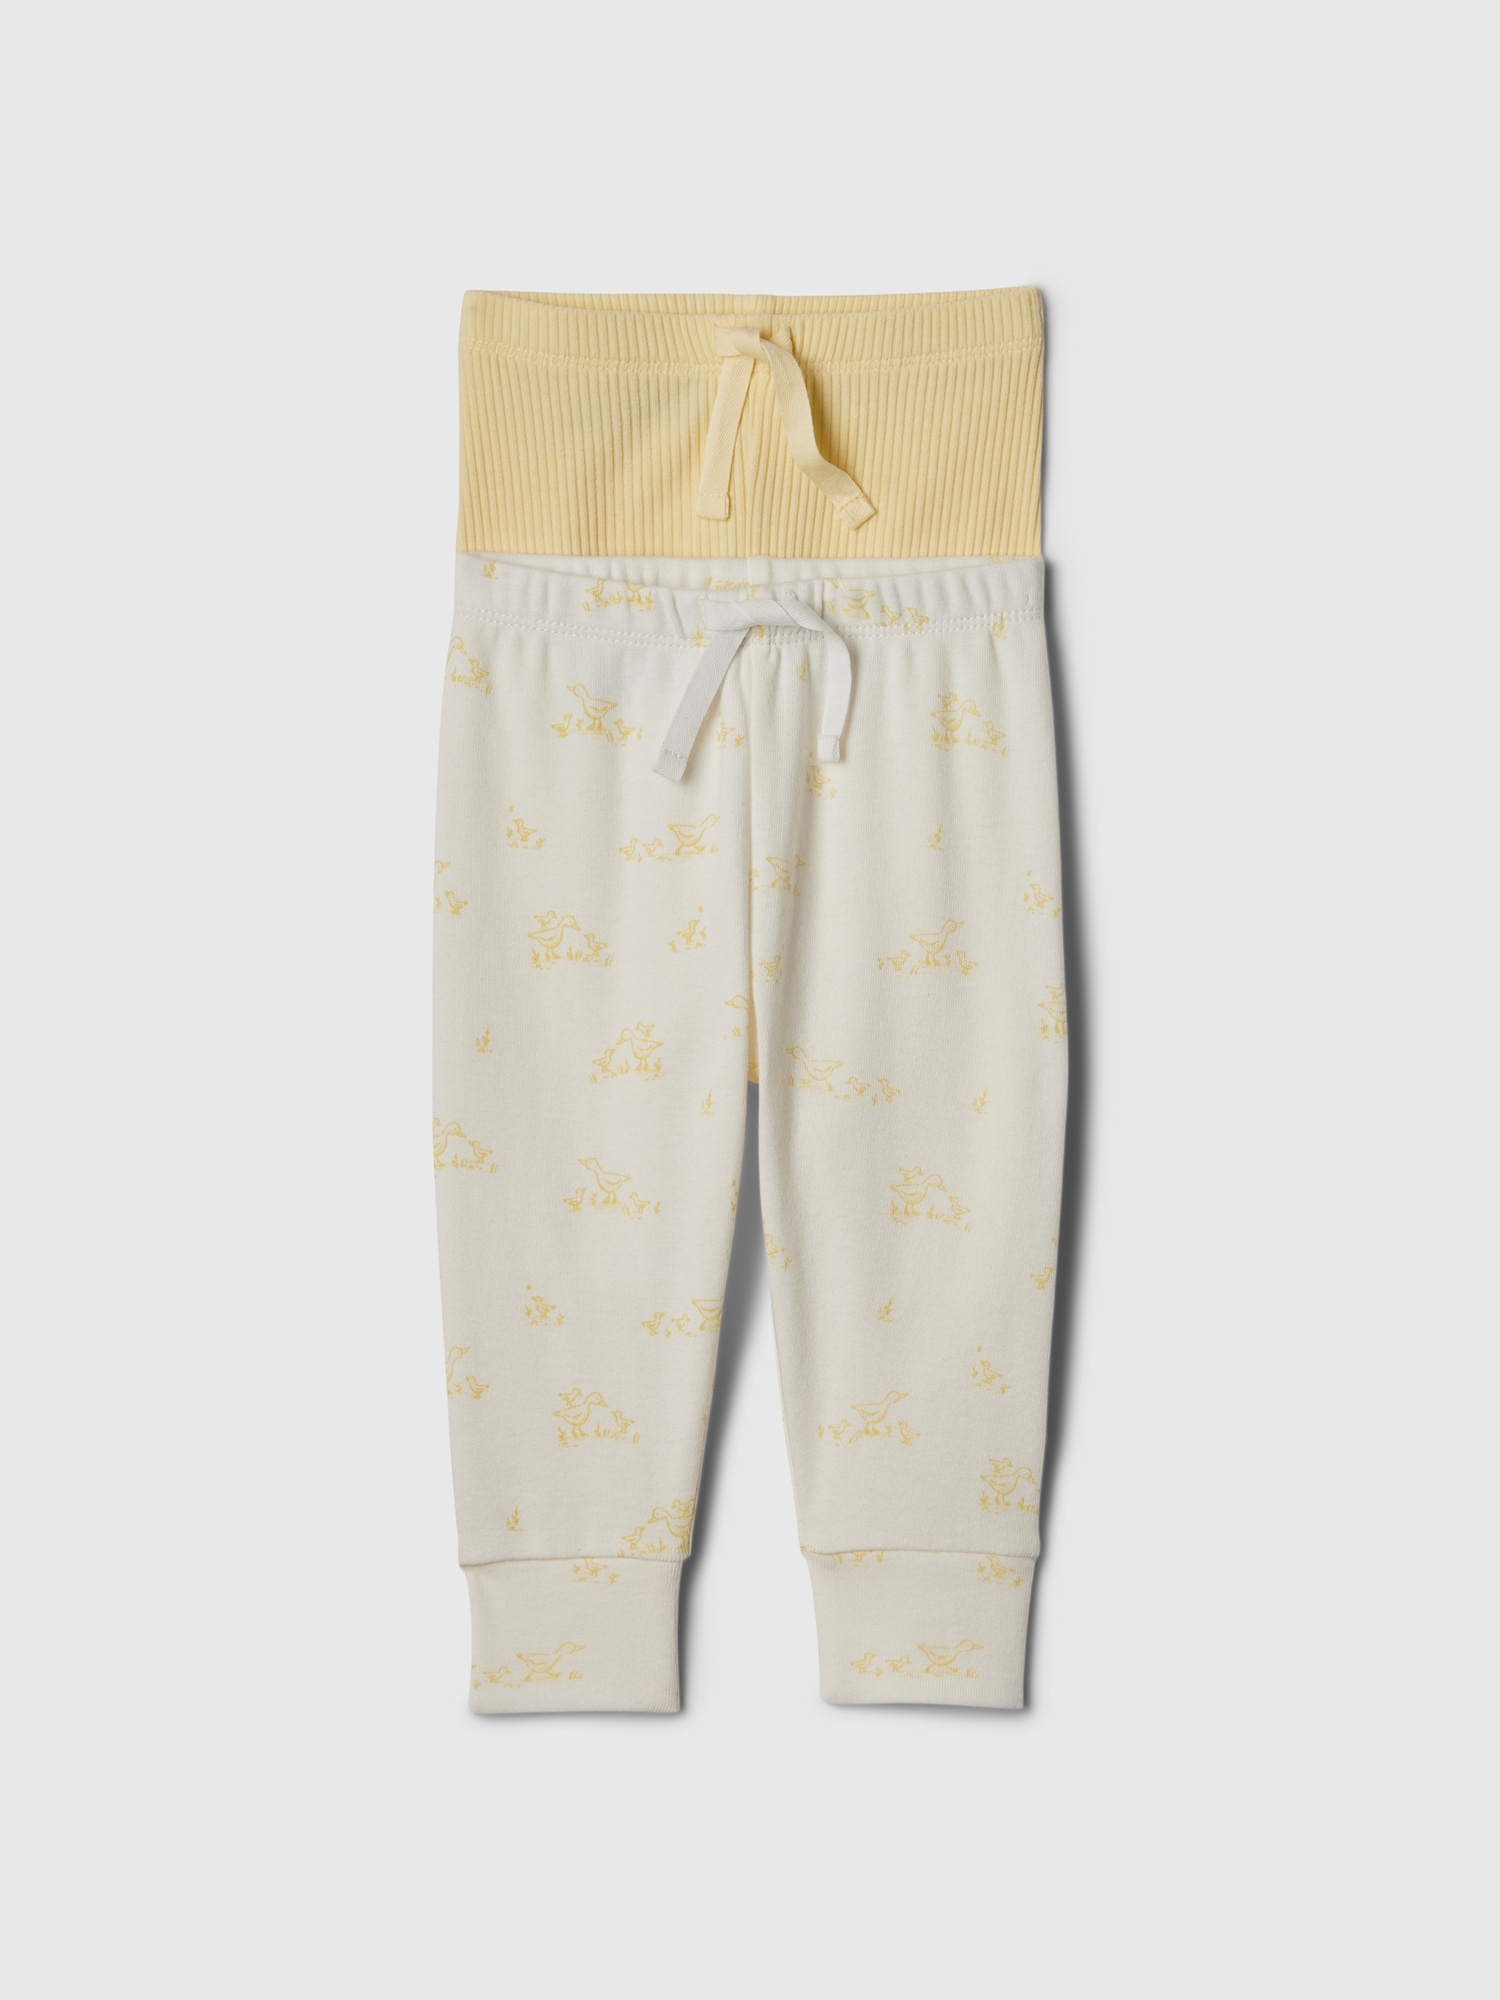 Baby First Favorites Pull-On Pants (2-Pack)